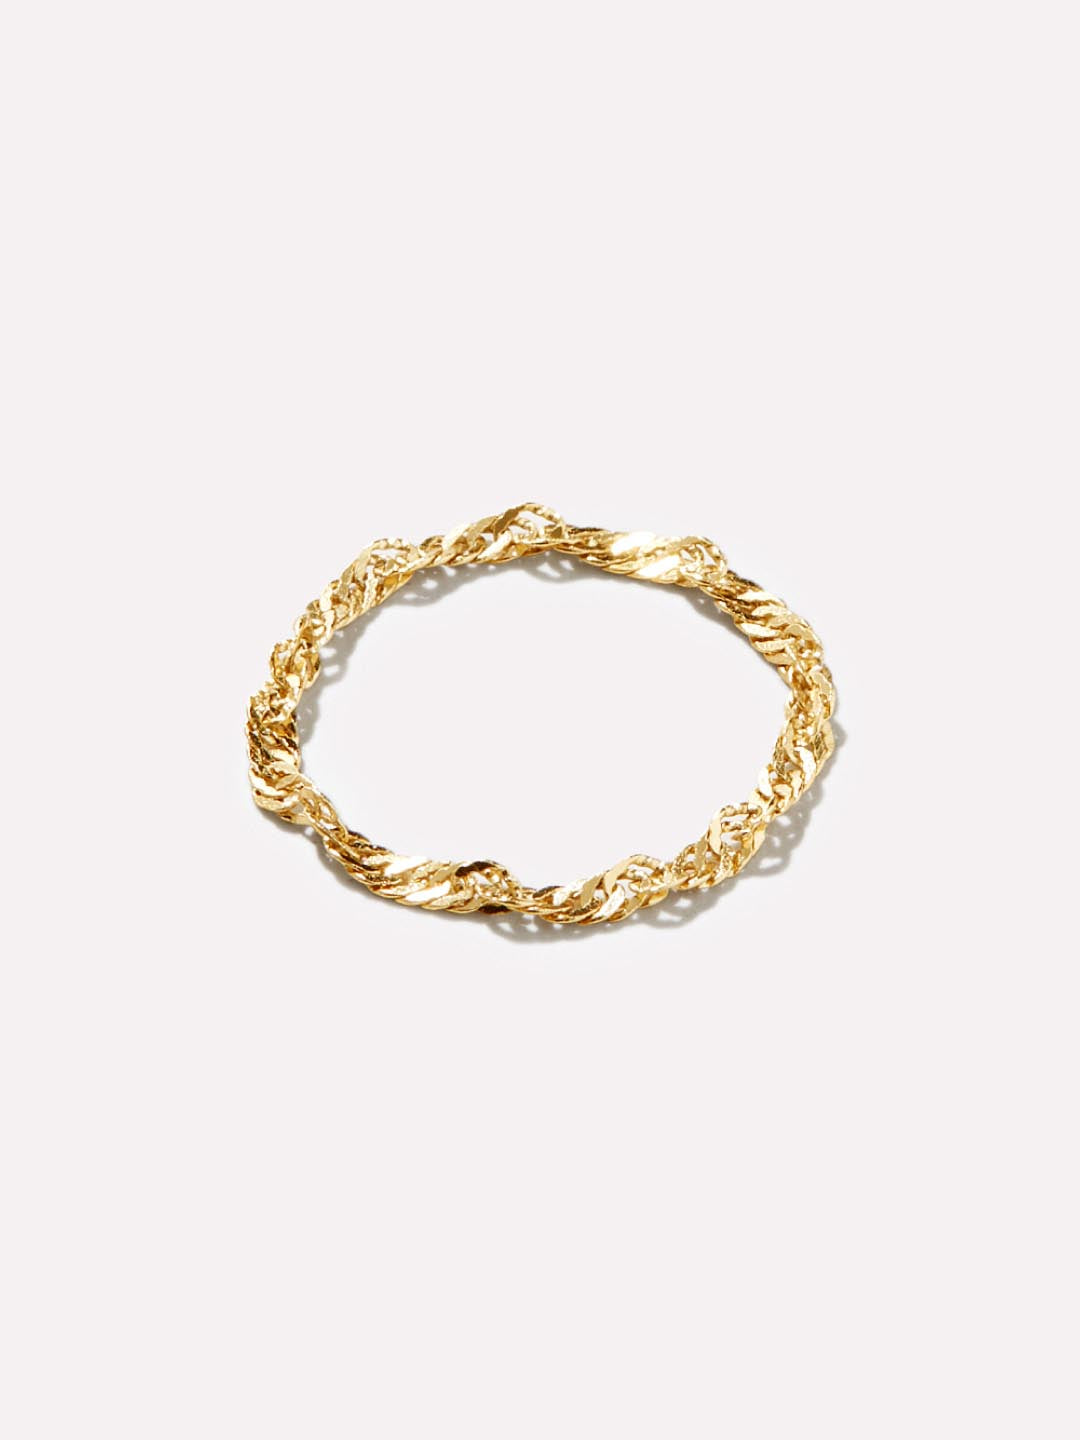 Anchor Chain Ring - Iver, Ana Luisa